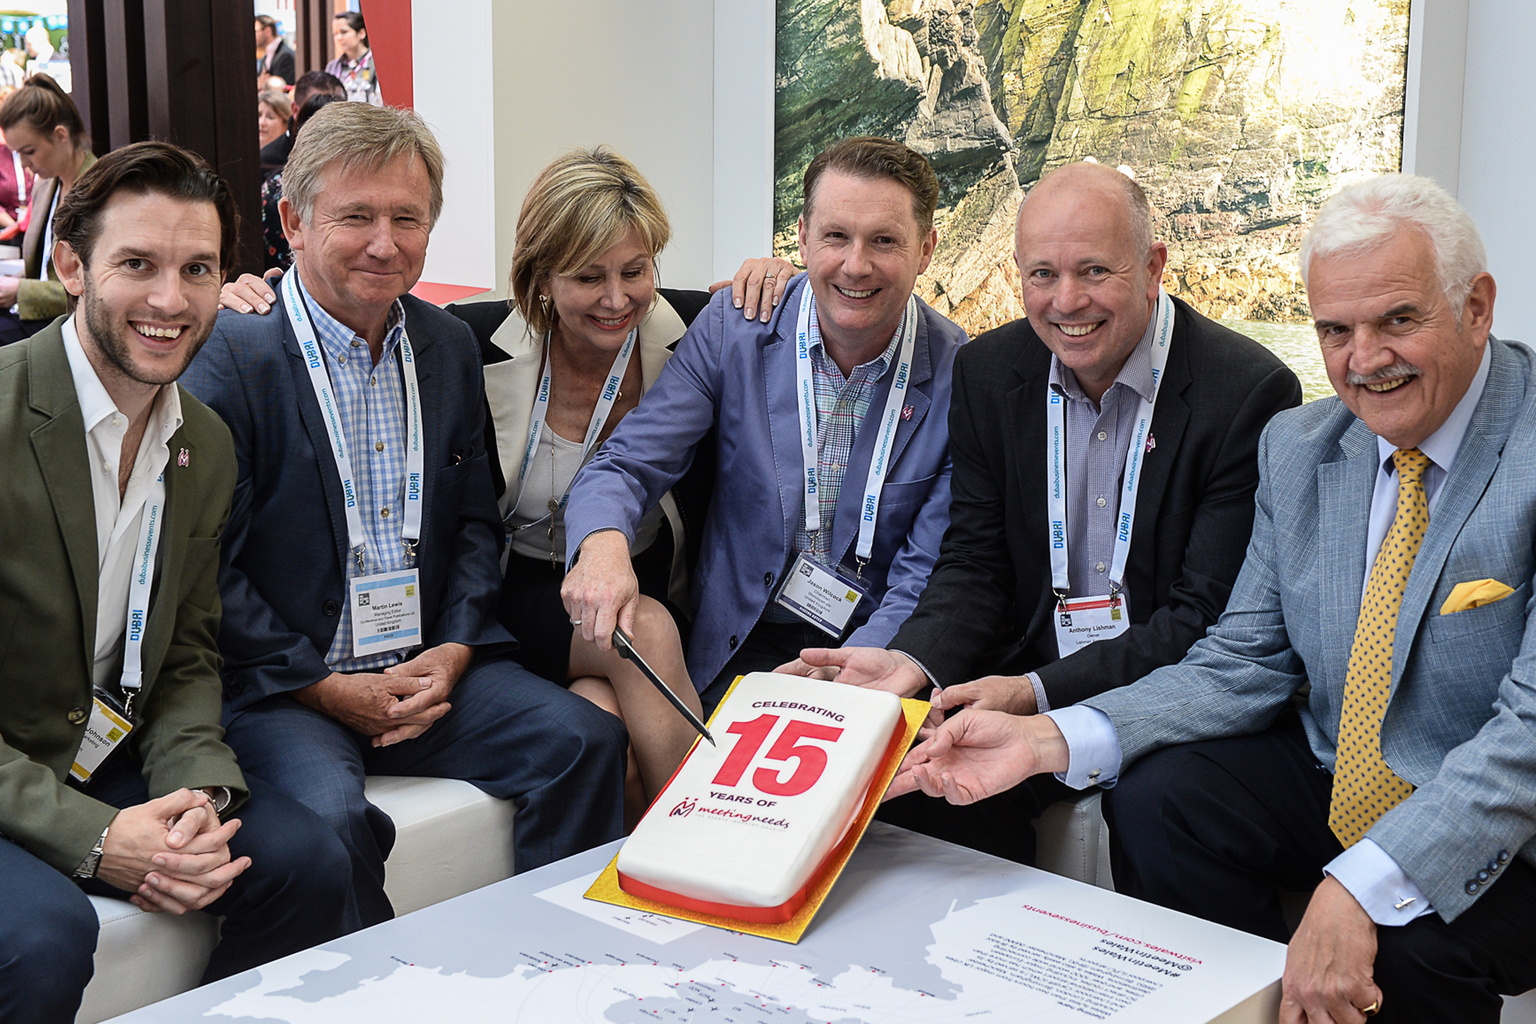 Happy 15th birthday to meeting needs – the events industry charity